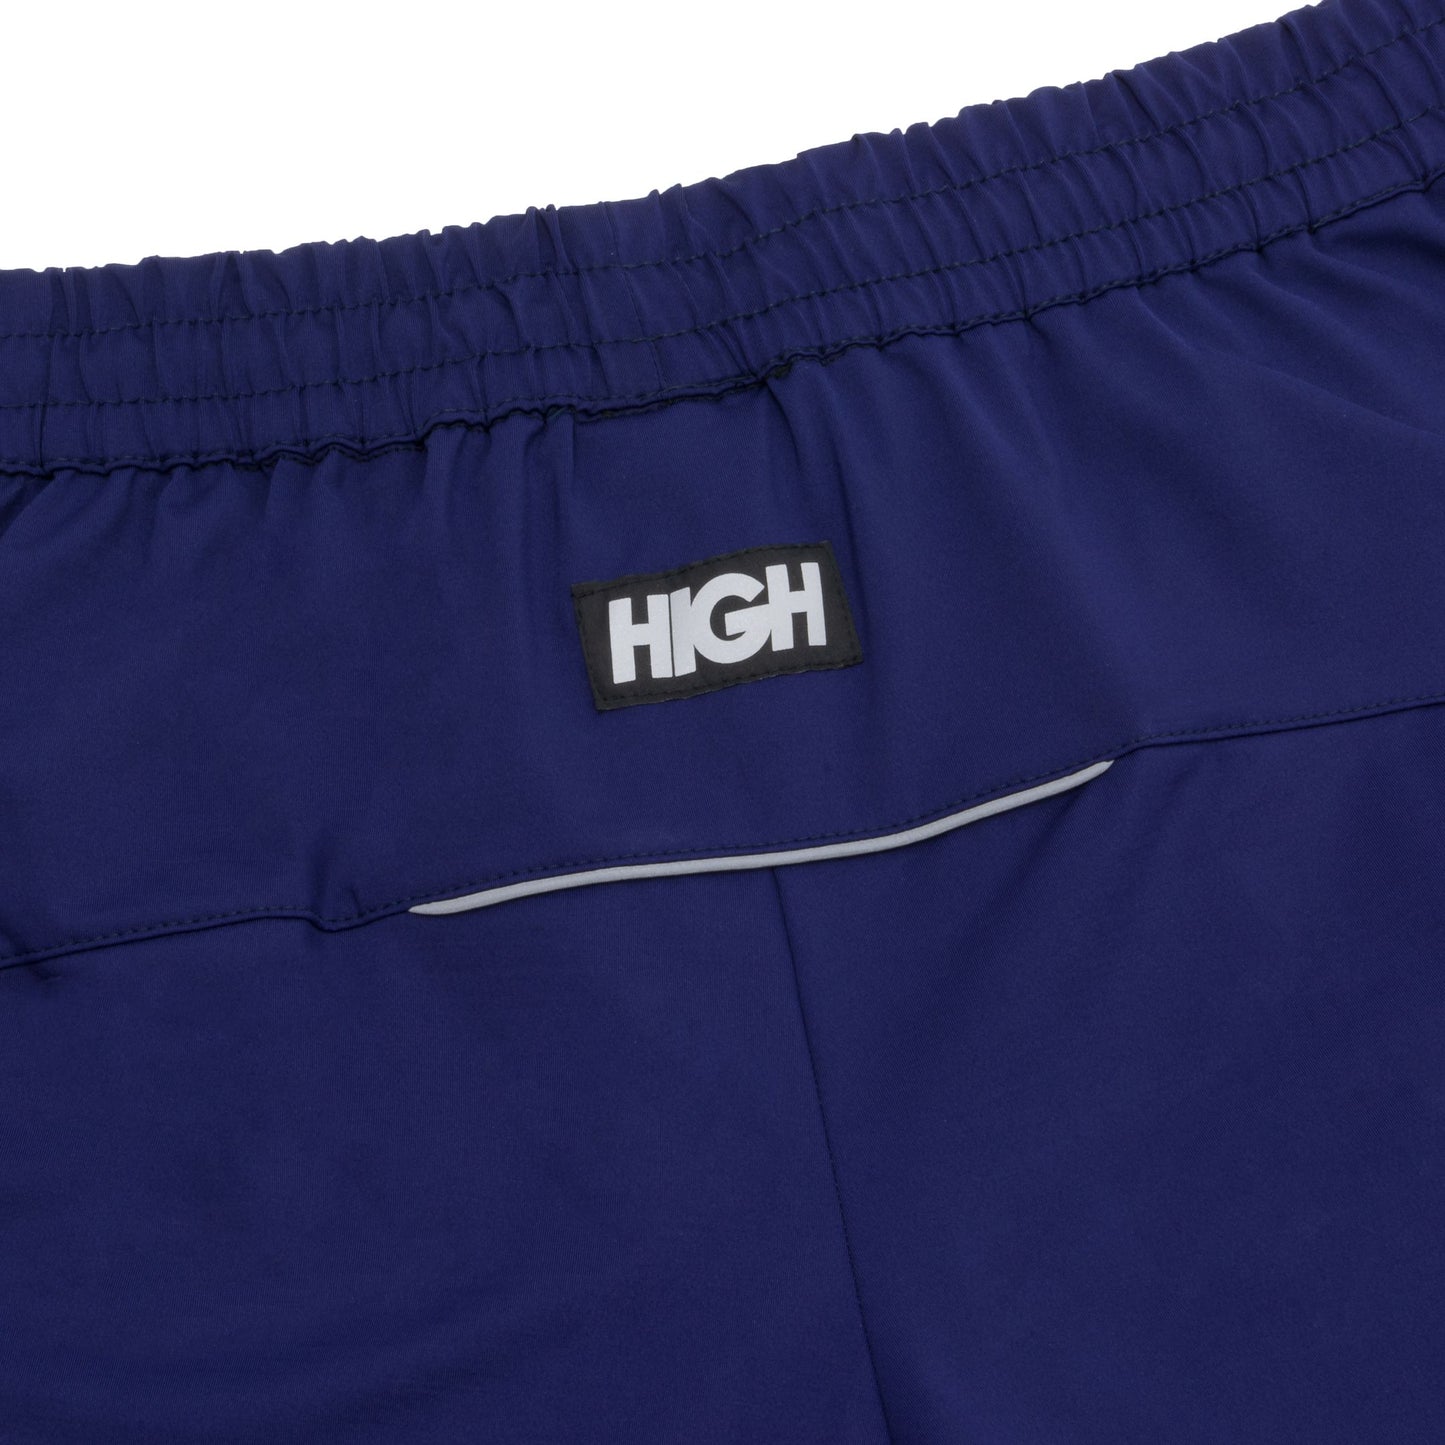 SHORTS HIGH DRY FIT SPEED NAVY